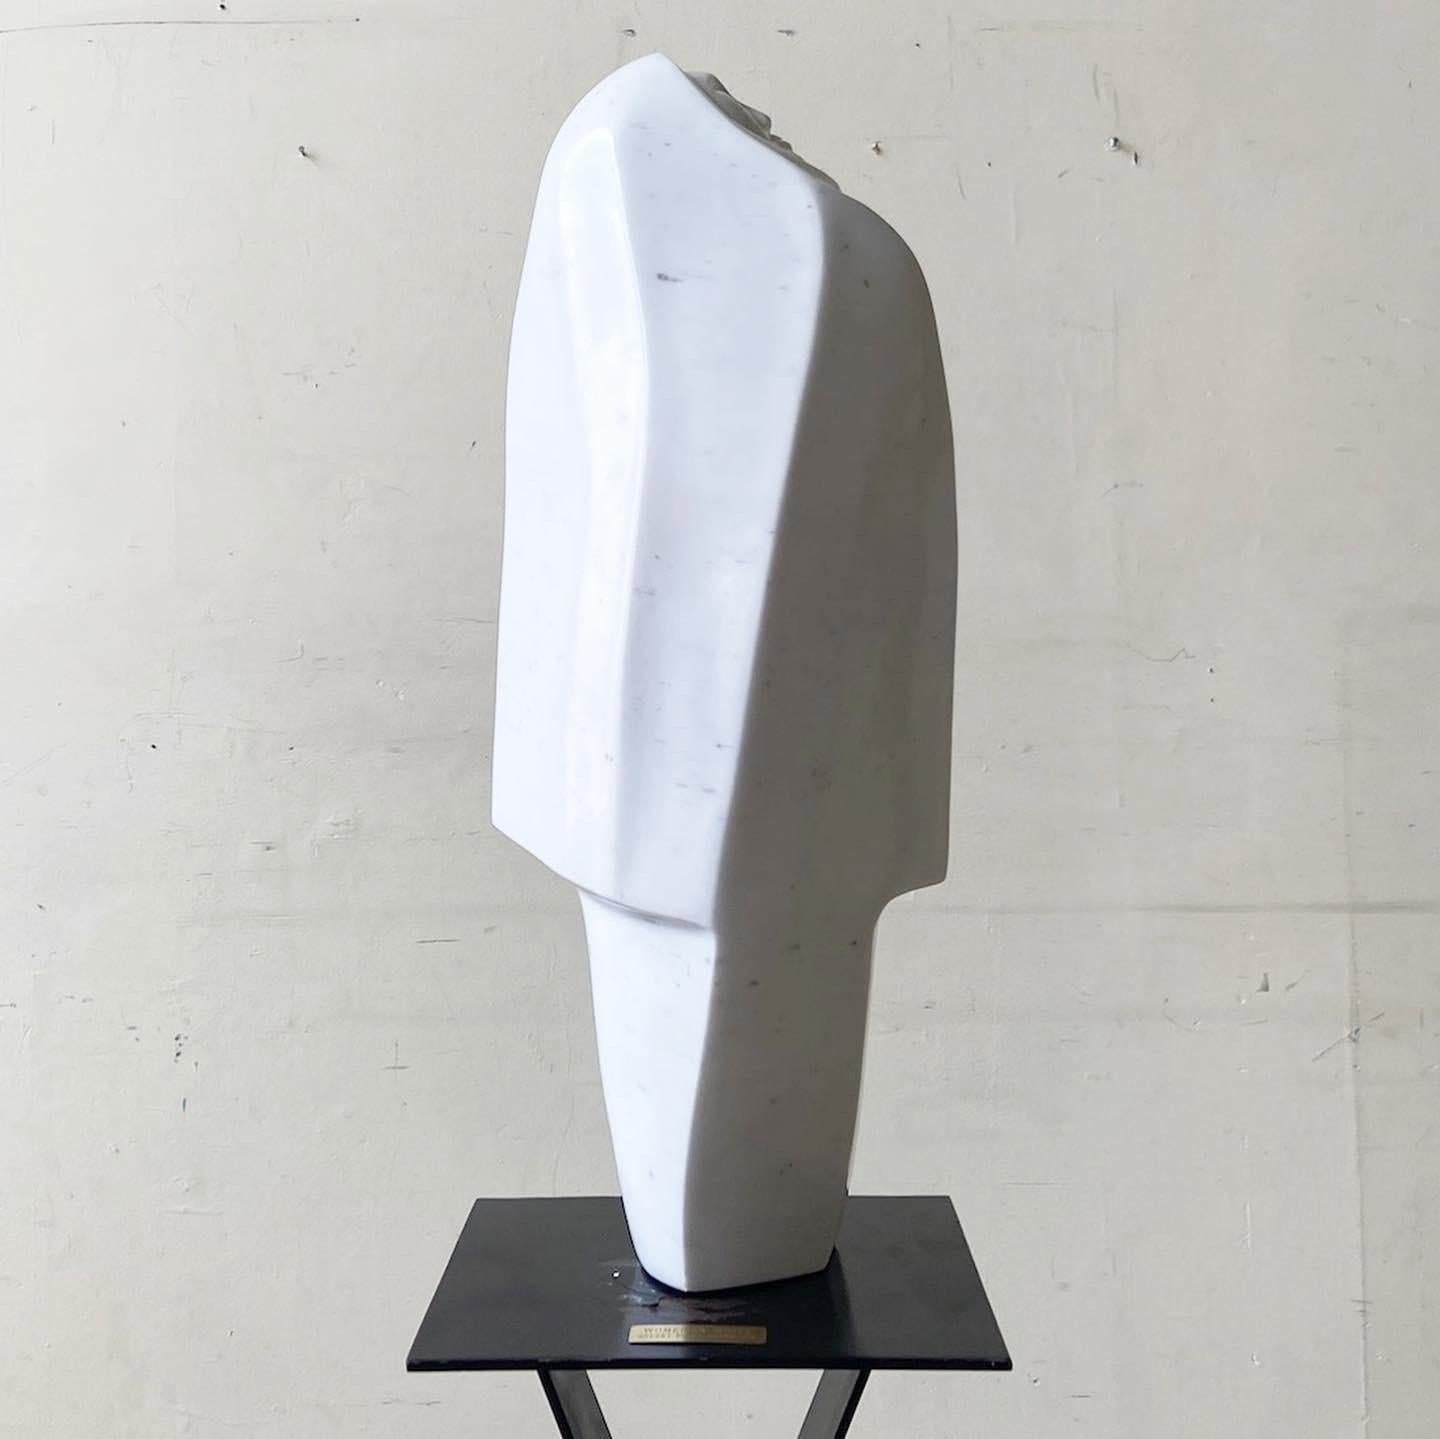 Postmodern Woman in White Marble Sculpture on Metal Pedestal - 2 Pieces For Sale 1